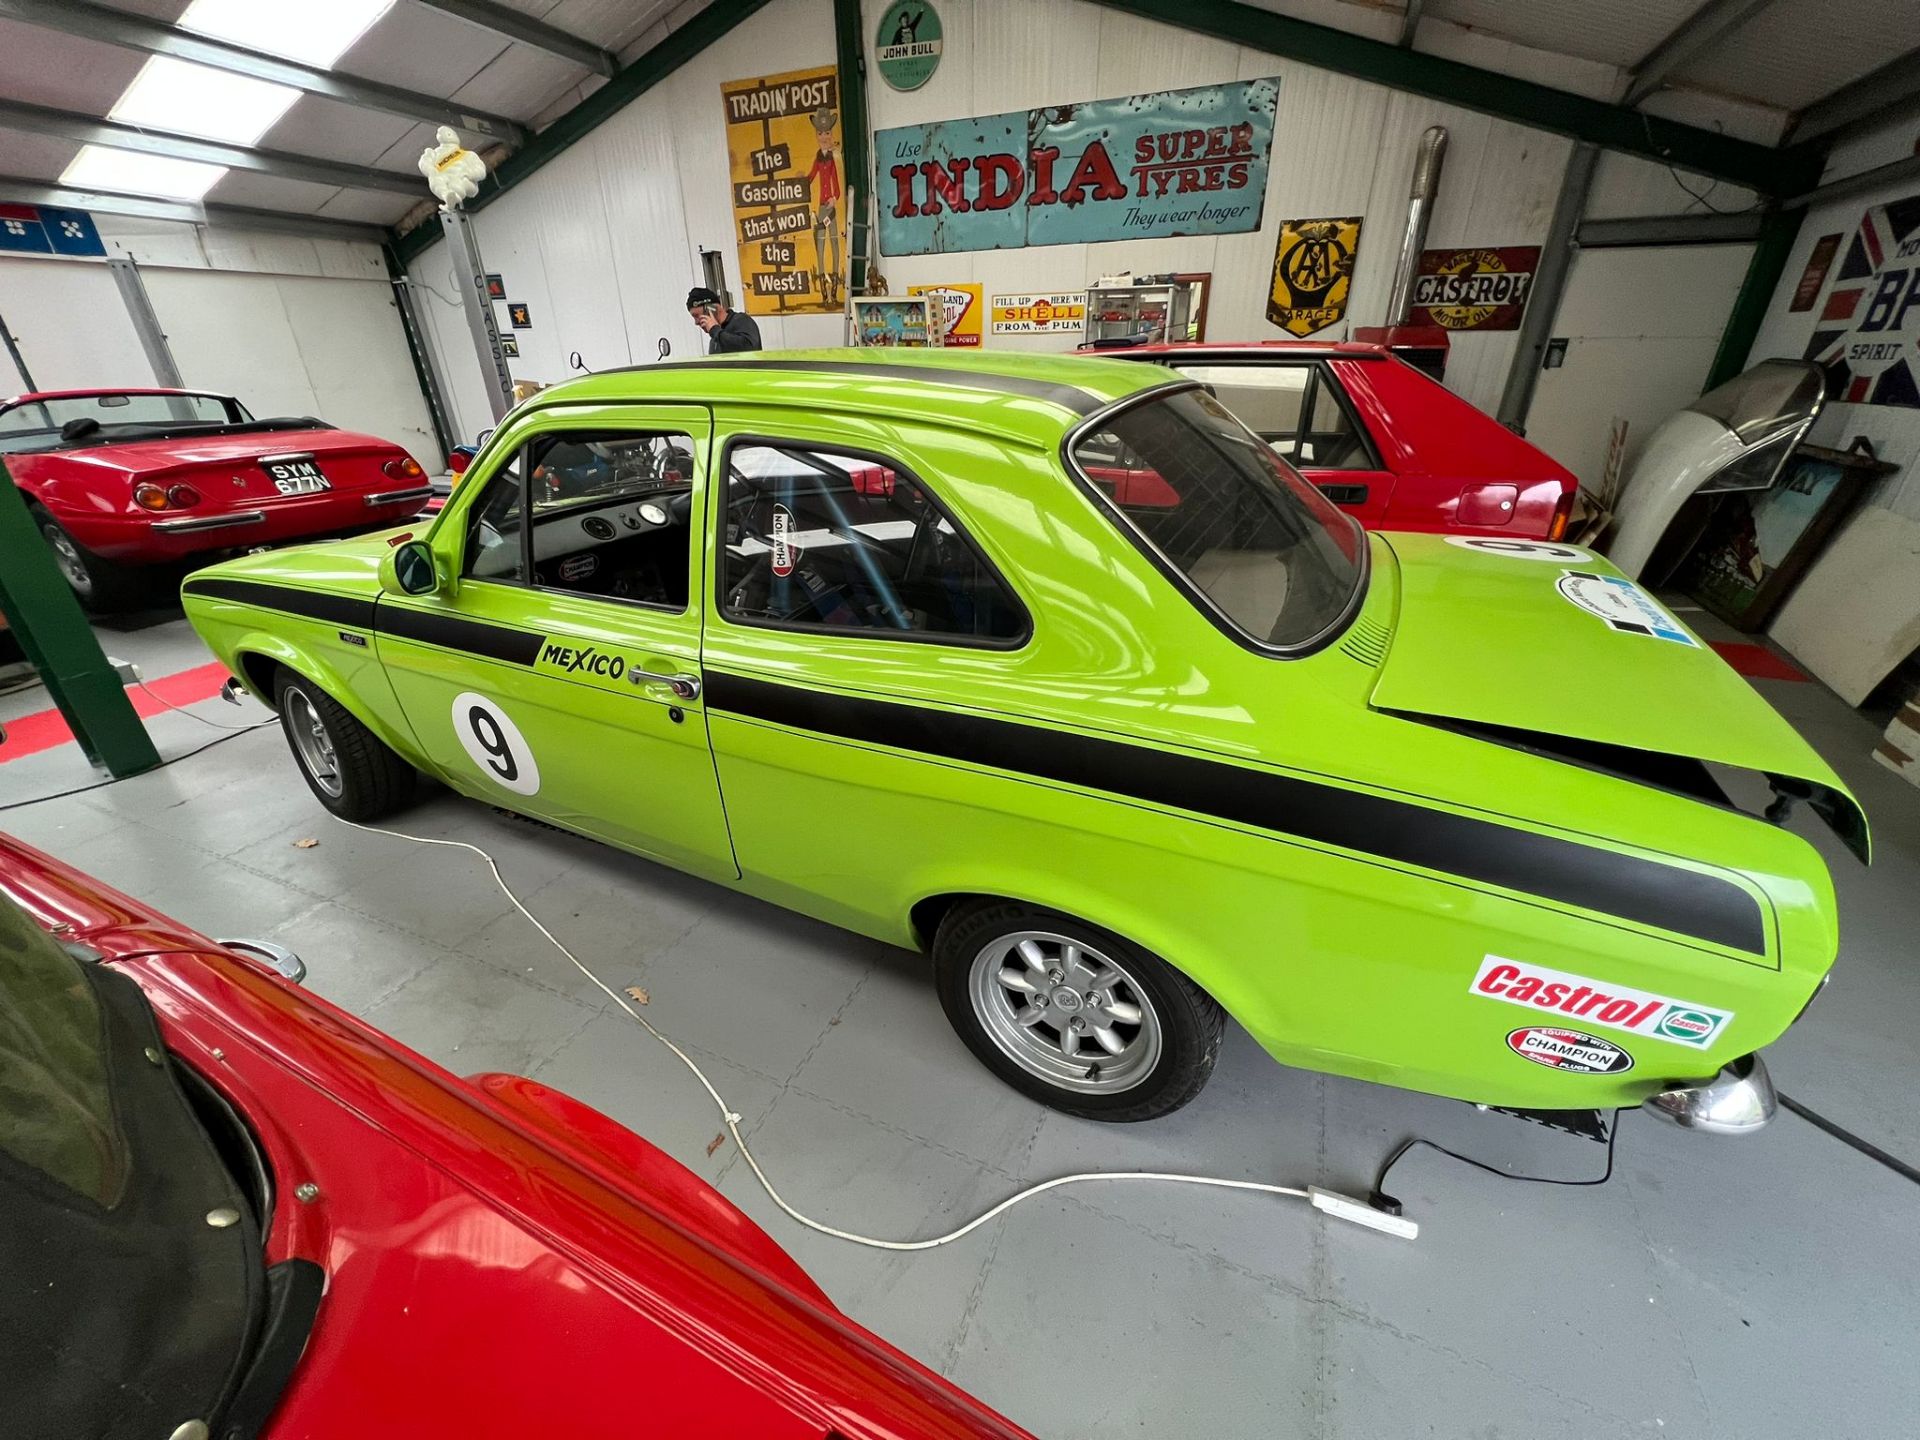 Ford Escort Mk1 - Mexico Homage Competition Car - Image 7 of 18